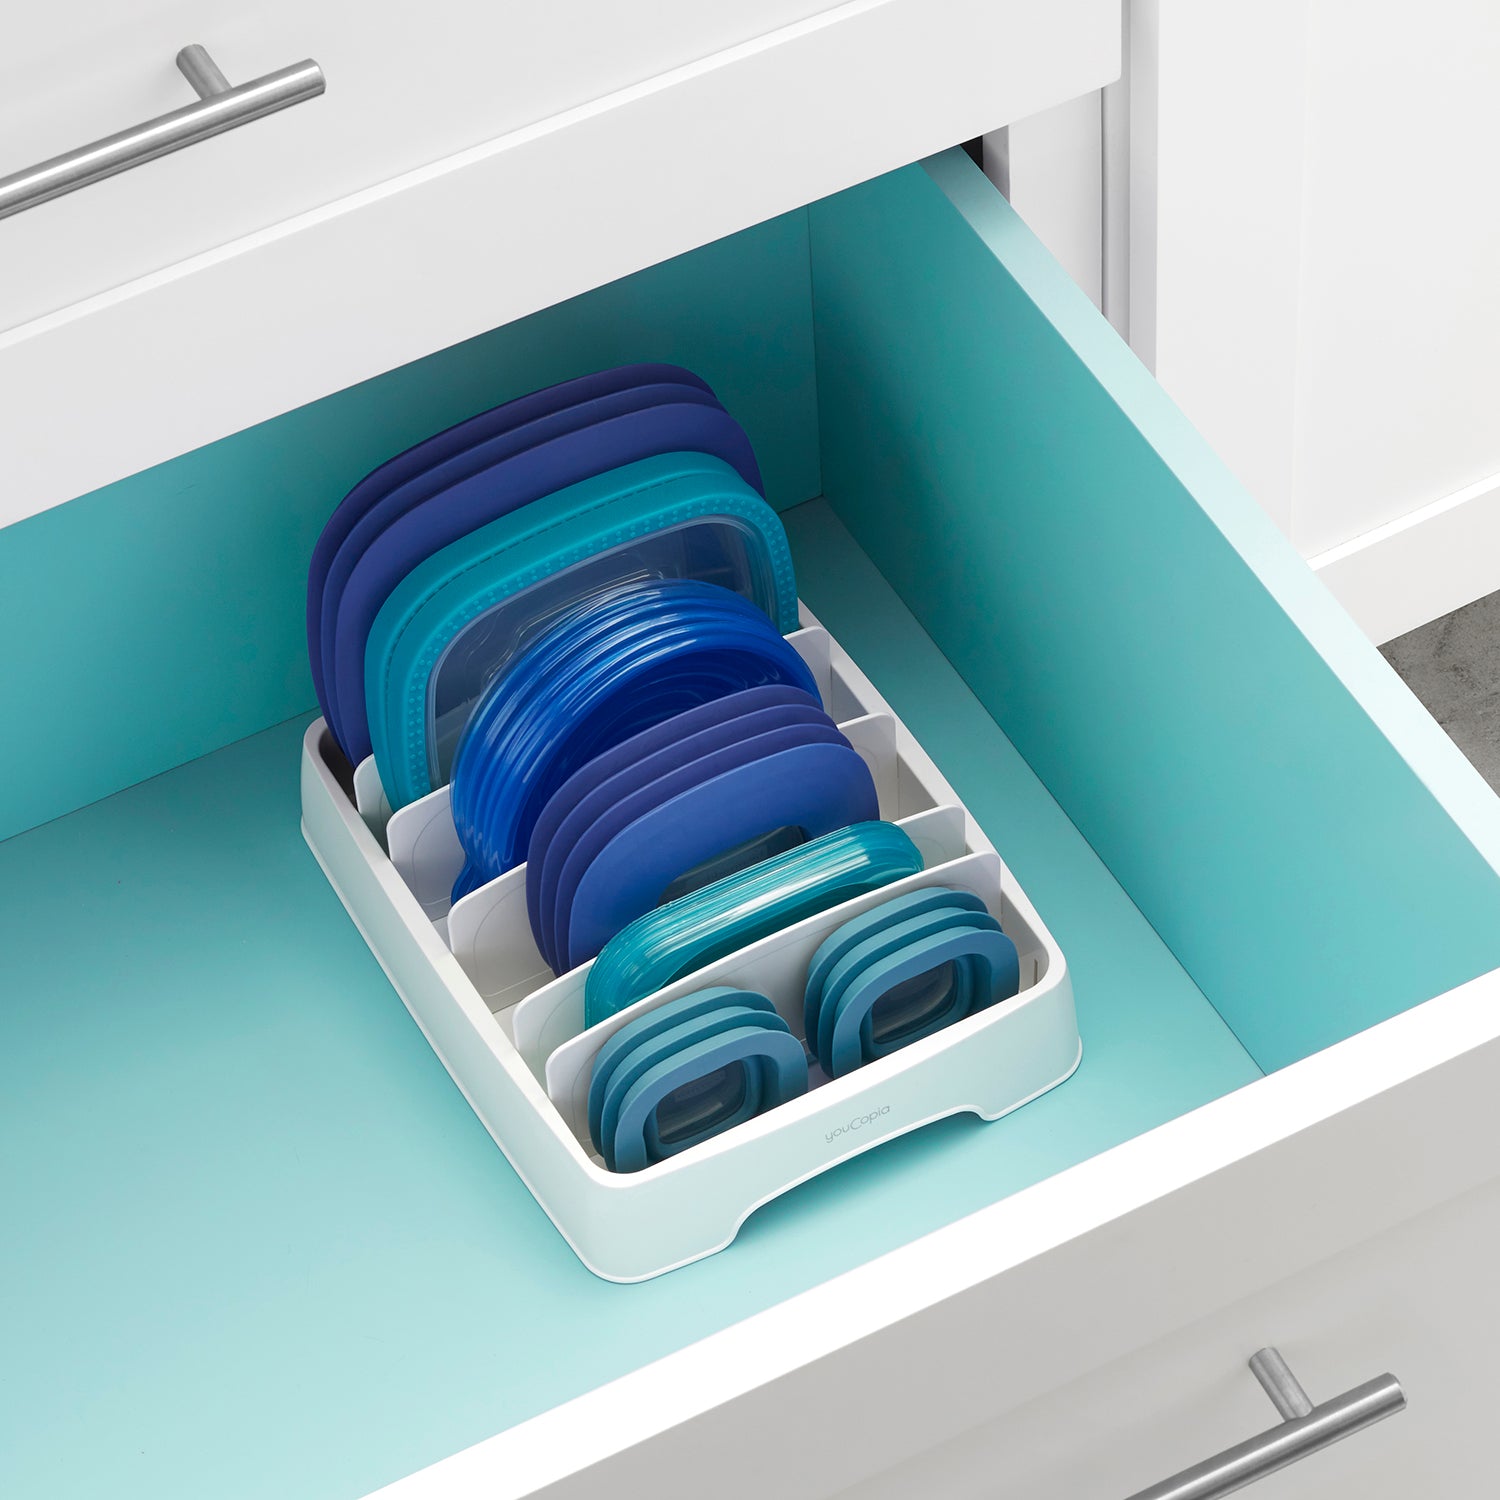 YouCopia StoraLid Plastic Container Lid Organizer Review - Kitchen